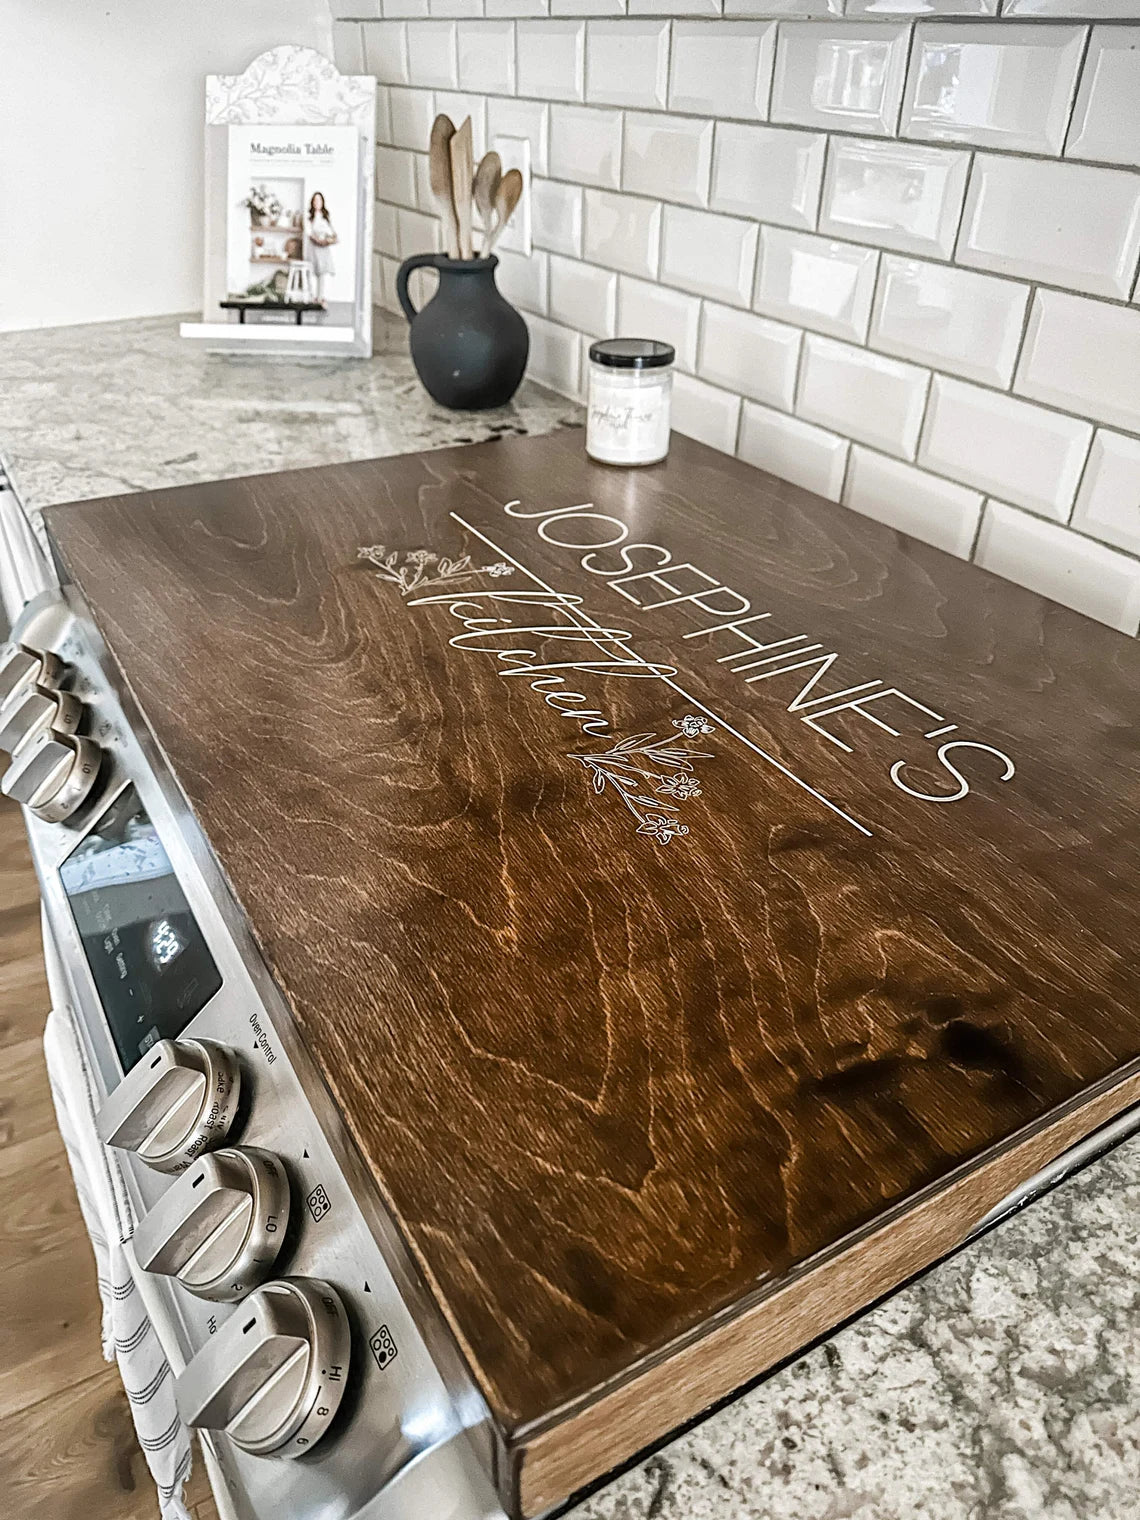 Josephine's Kitchen Stove Cover in Warm Brown with Ivory Script